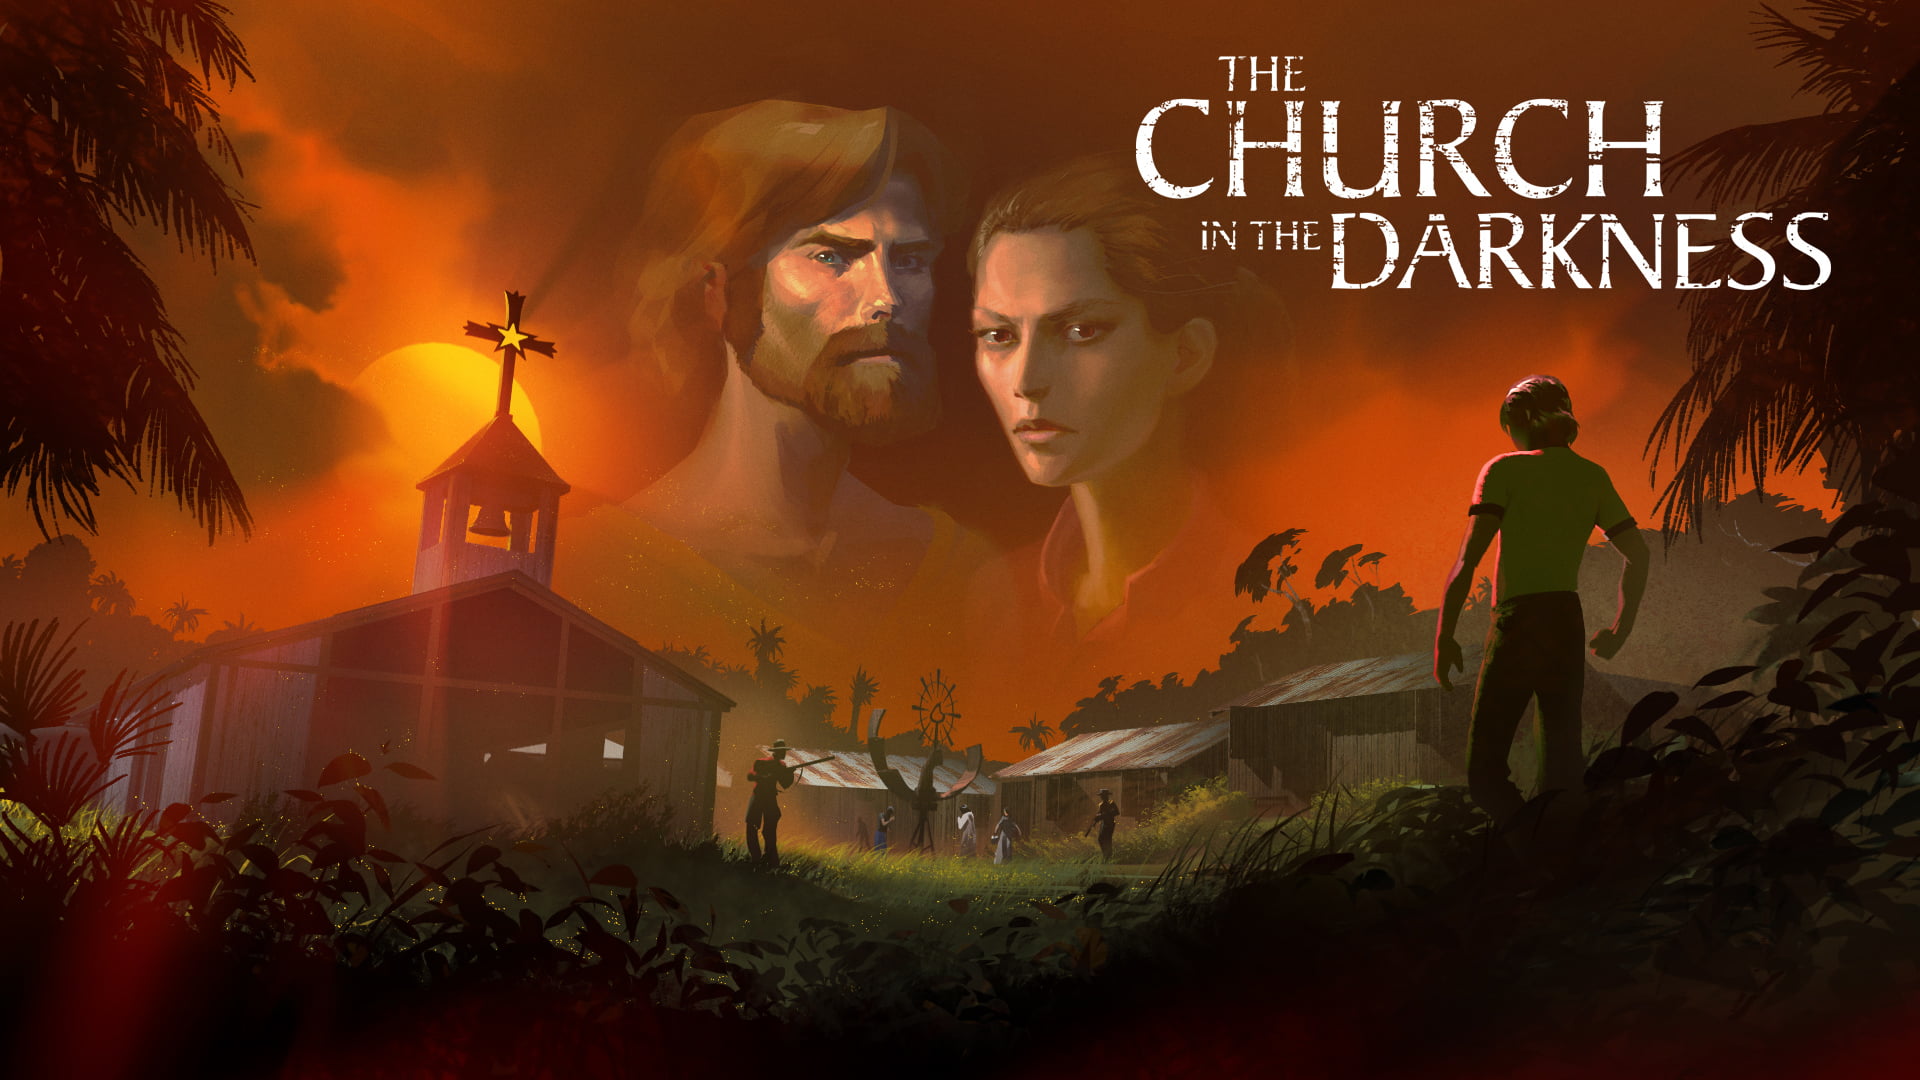 The church in the darkness - review | the church in the darkness | married games fling to the finish | fling to the finish | the church in the darkness